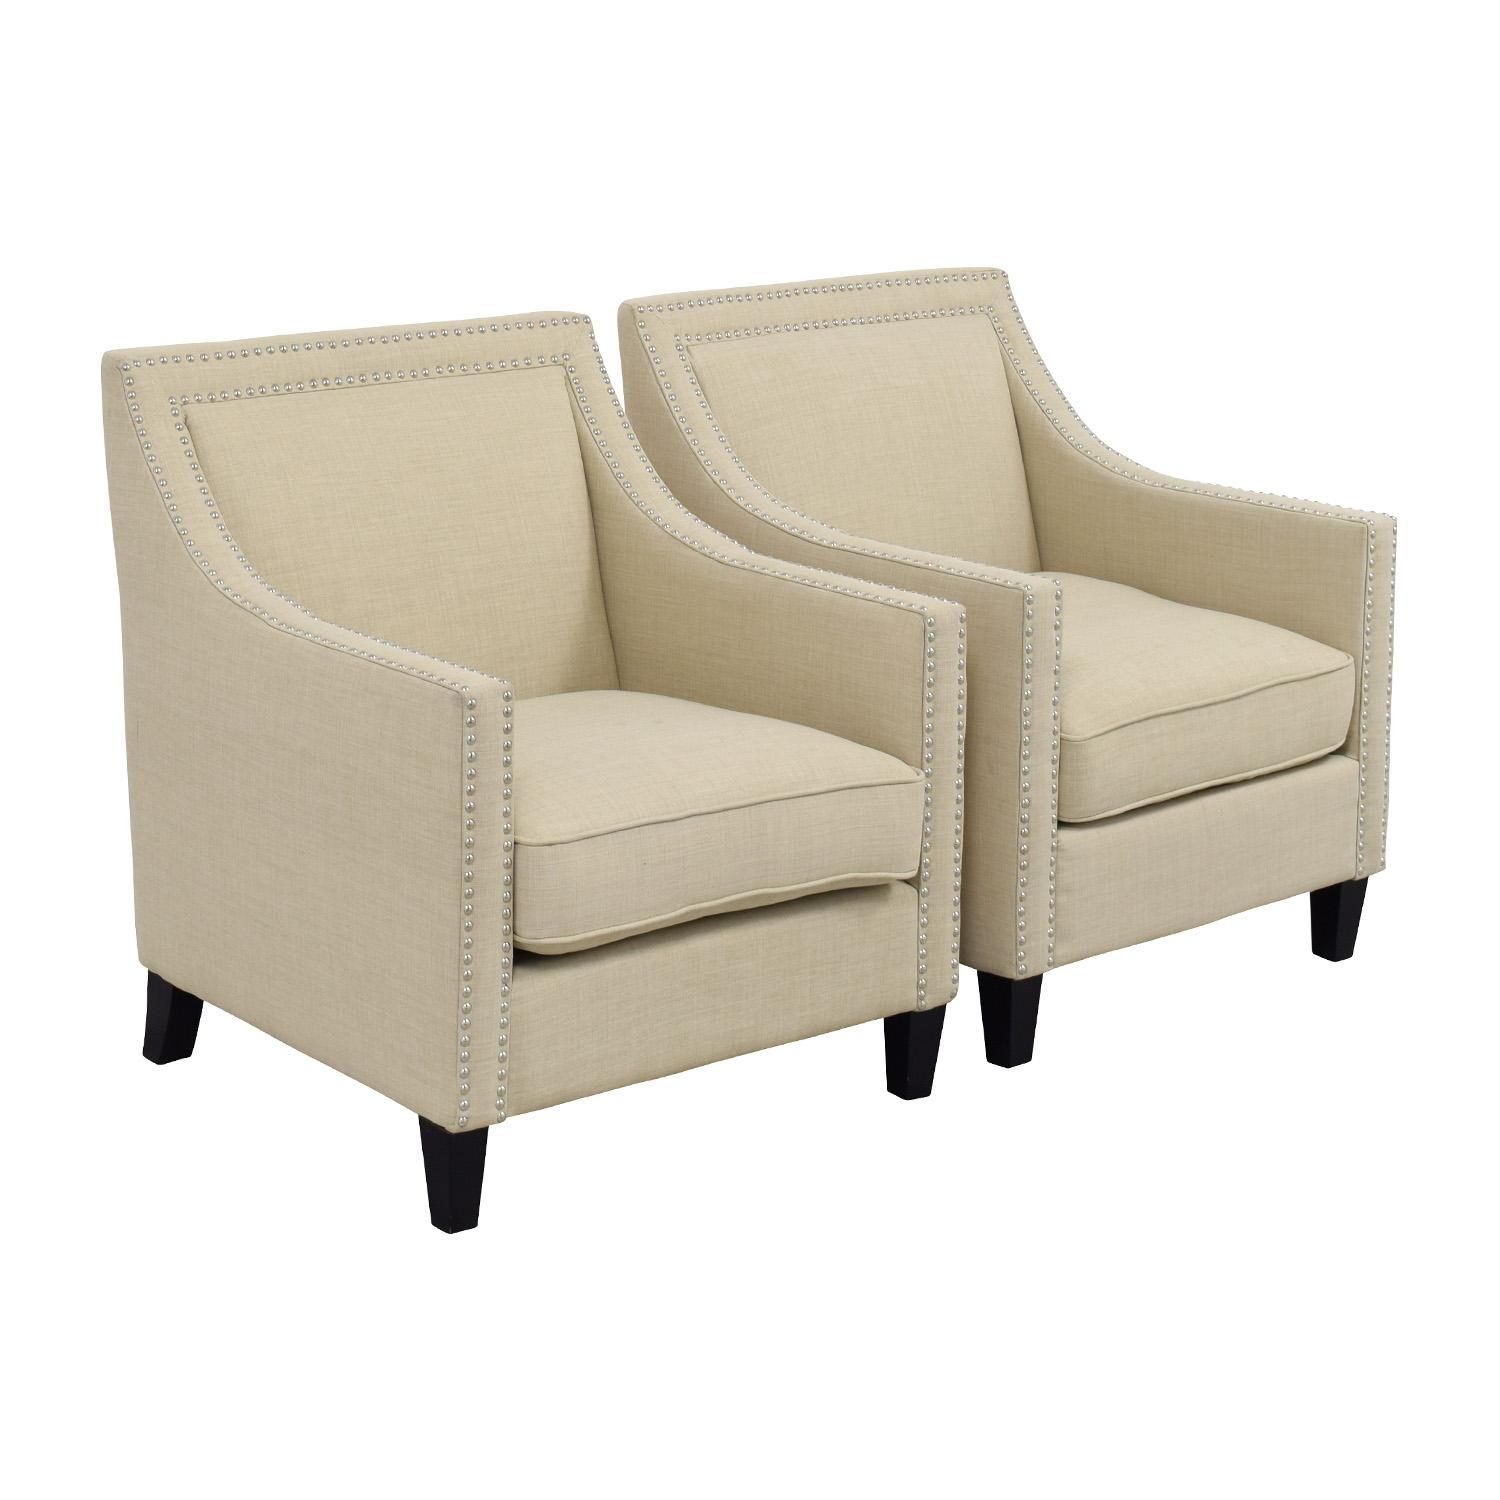 67% Off – Studded Beige Sofa Arm Chairs / Chairs Pertaining To Sofa Arm Chairs (Photo 19 of 20)